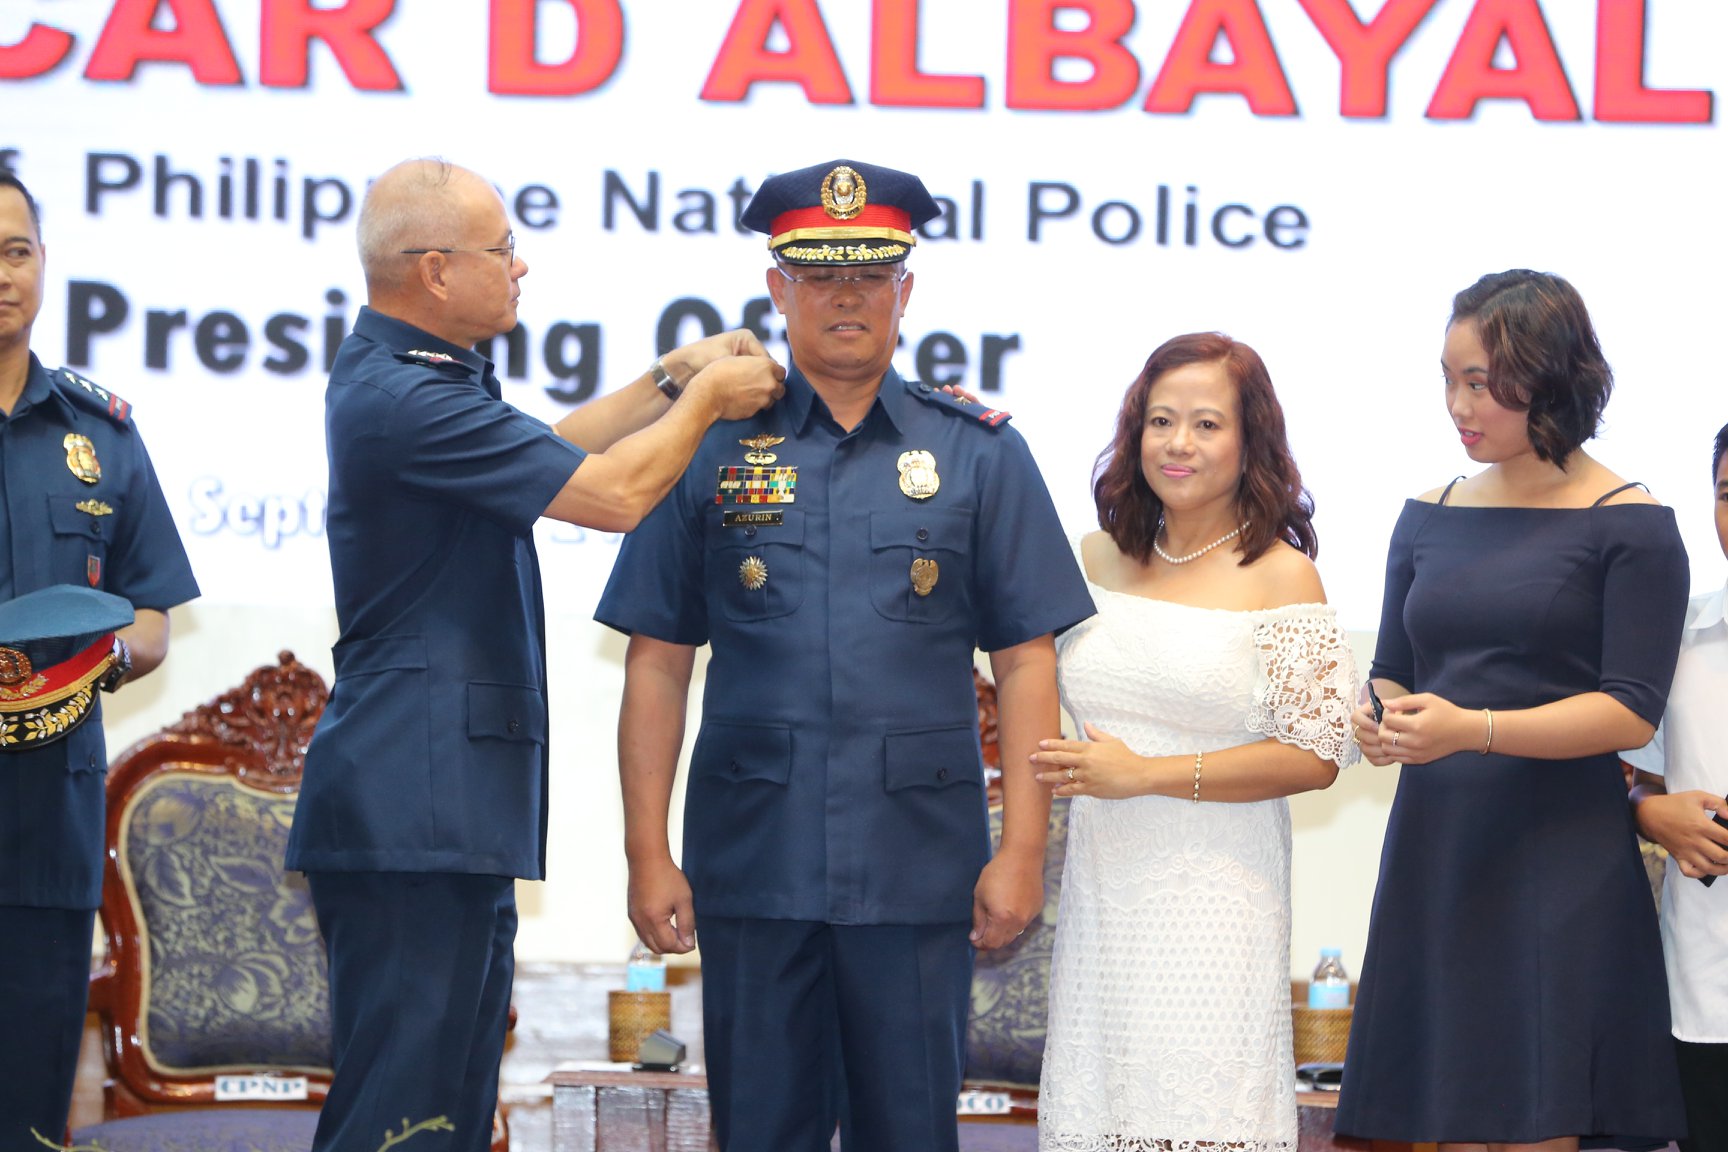 PBBM names Azurin as new PNP chief Philippine Canadian Inquirer